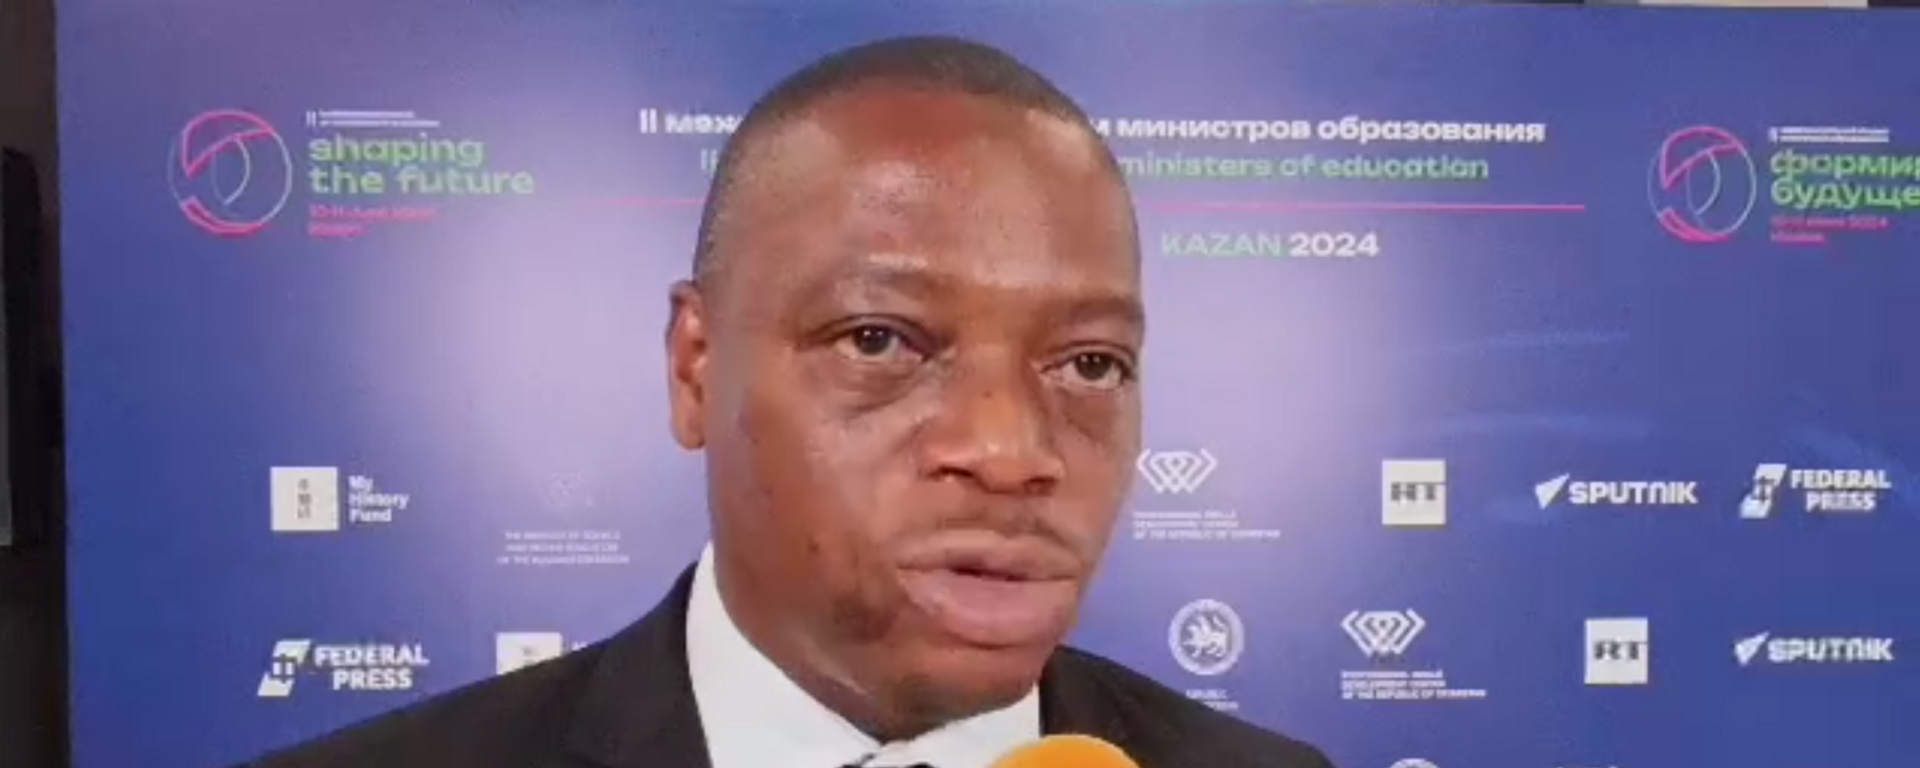 Kingsley Nyarko, Minister of Education of Ghana, spoke to Sputnik Africa on the sidelines of the II International Forum of Ministers of Education, organized by the Russian Ministry of Education, the My History Foundation and the Government of the Russian Republic of Tatarstan on June 10-11. - Sputnik Africa, 1920, 13.06.2024